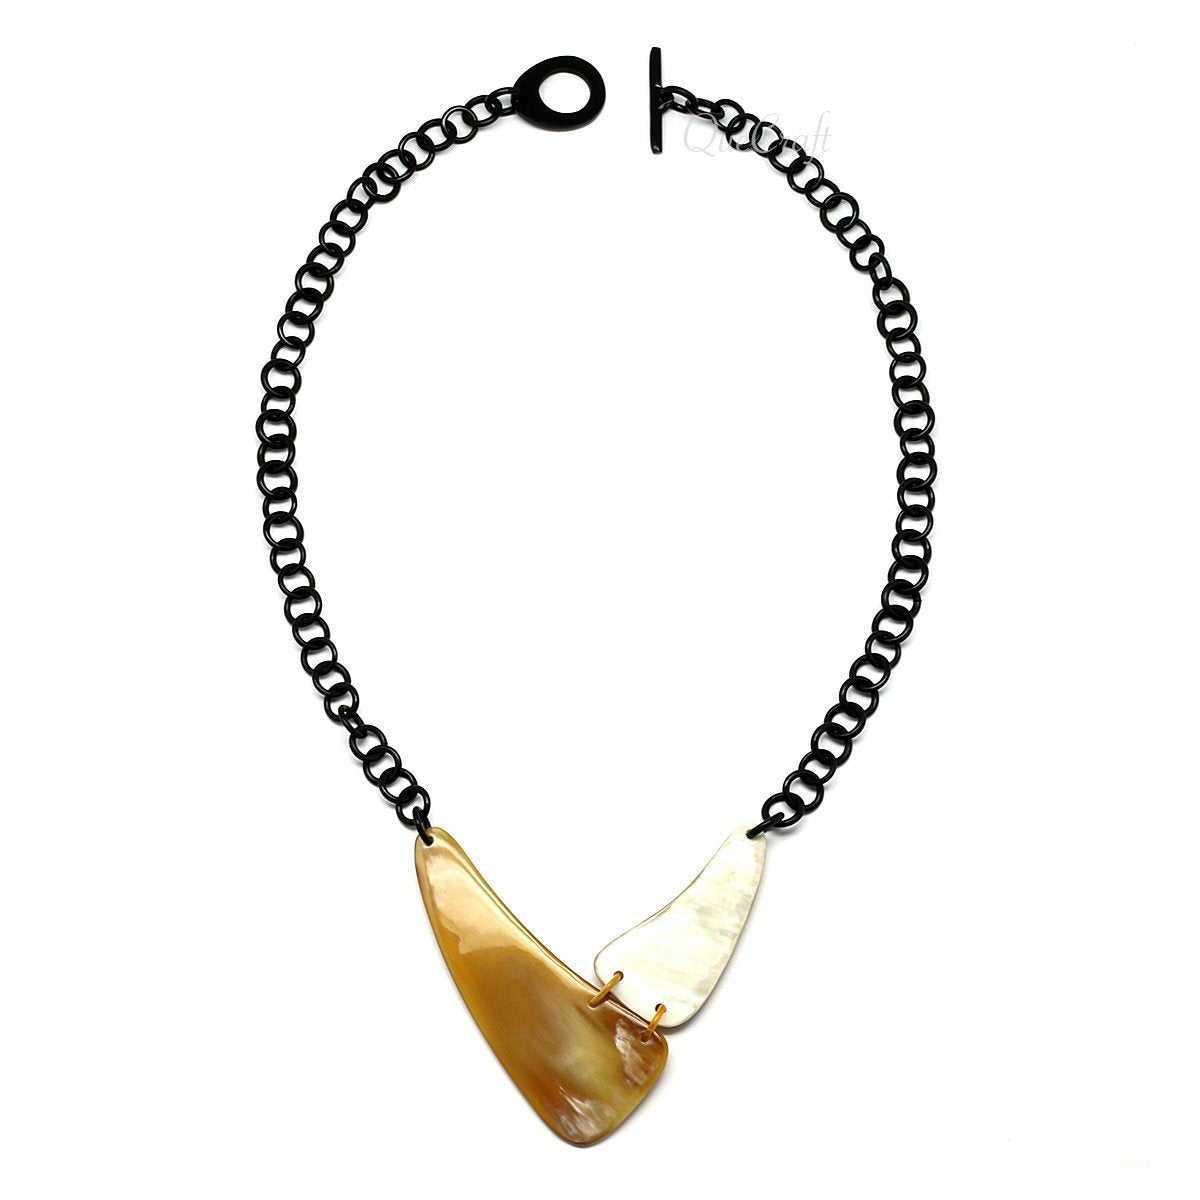 Horn Chain Necklace #9712 - HORN JEWELRY